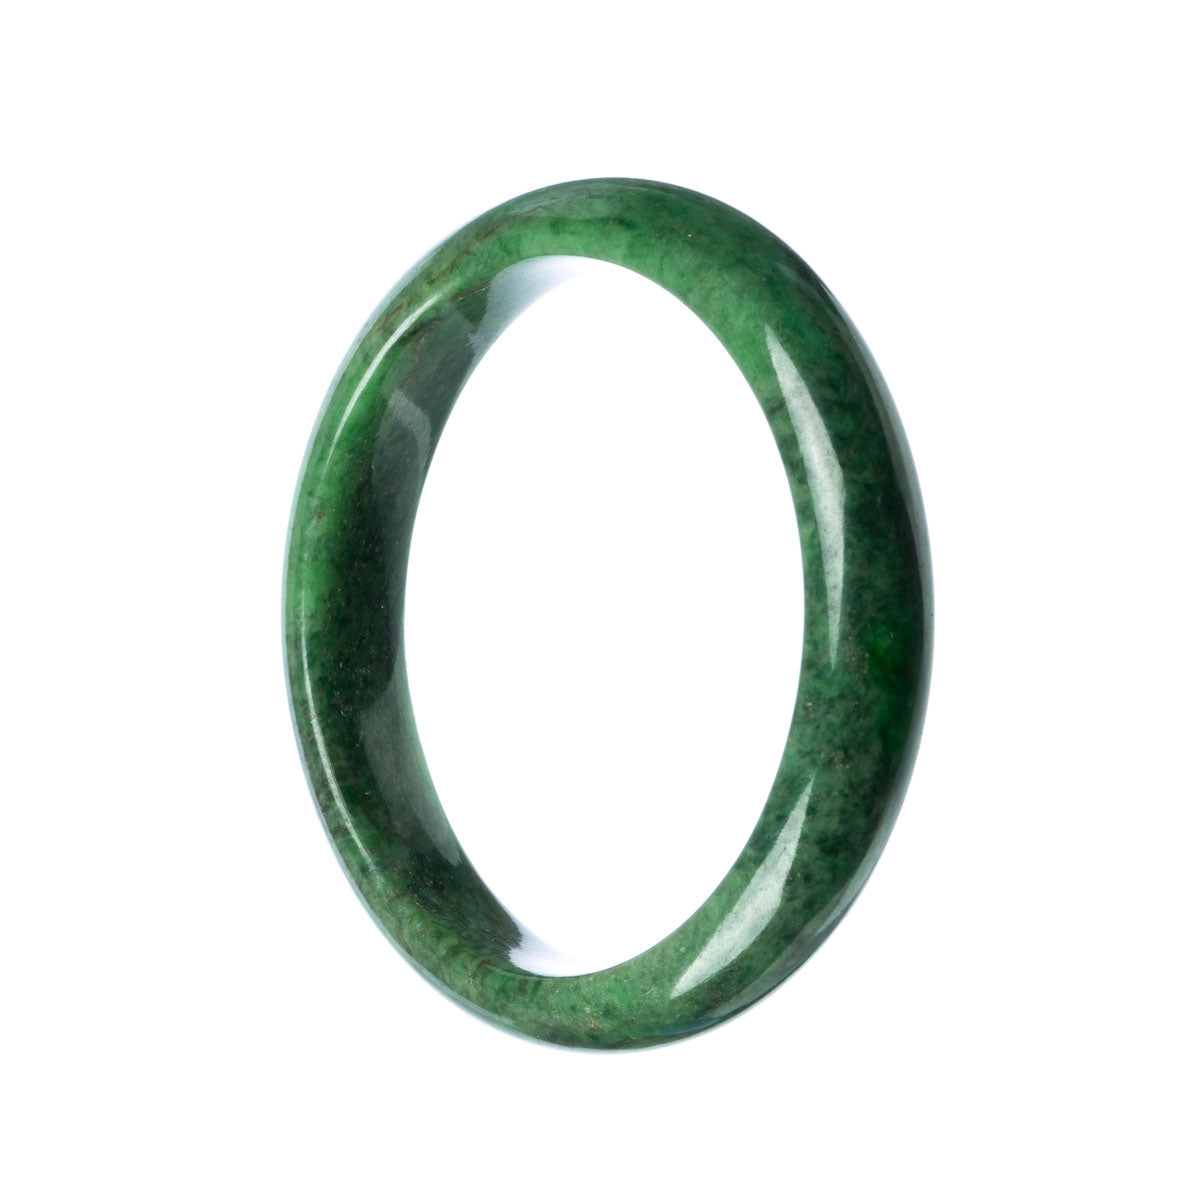 A stunning green Burma Jade bangle bracelet with a half moon shape, measuring 63mm in size. A genuine Grade A piece, perfect for adding a touch of elegance to any outfit.